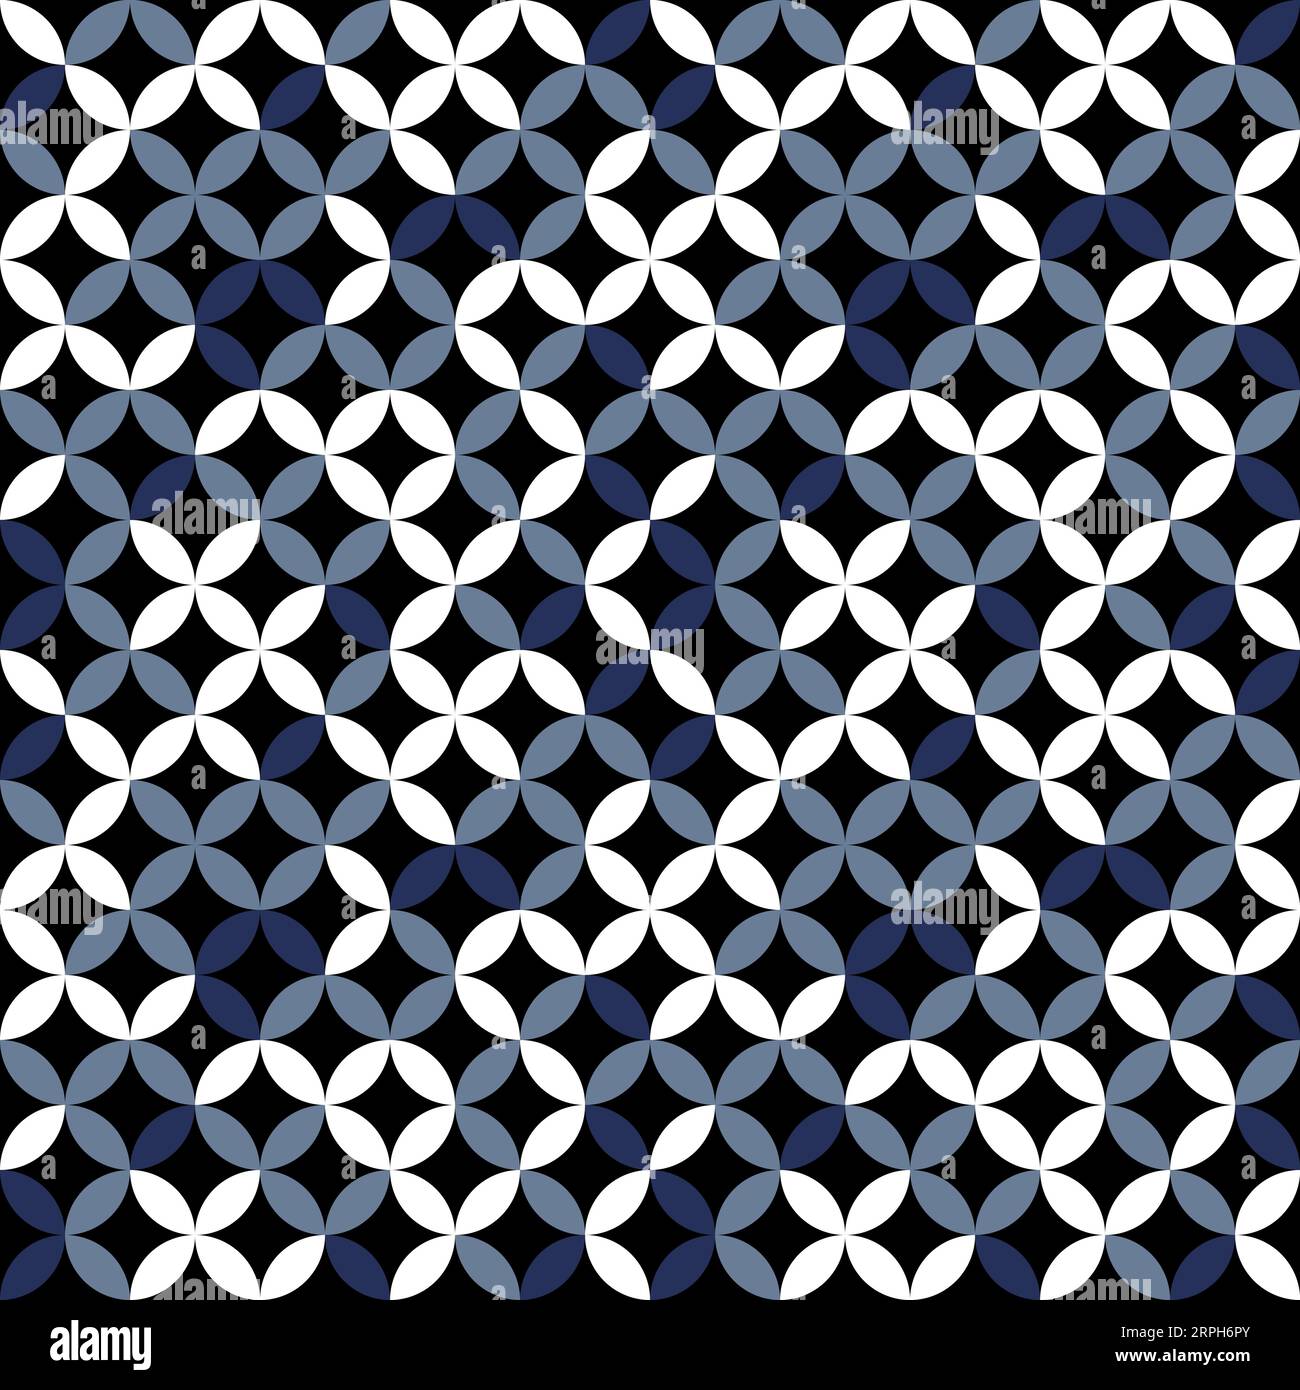 Blue and white overlapping circles seamless texture. Classic ovals and circles vector geometric fashion pattern. Stock Vector